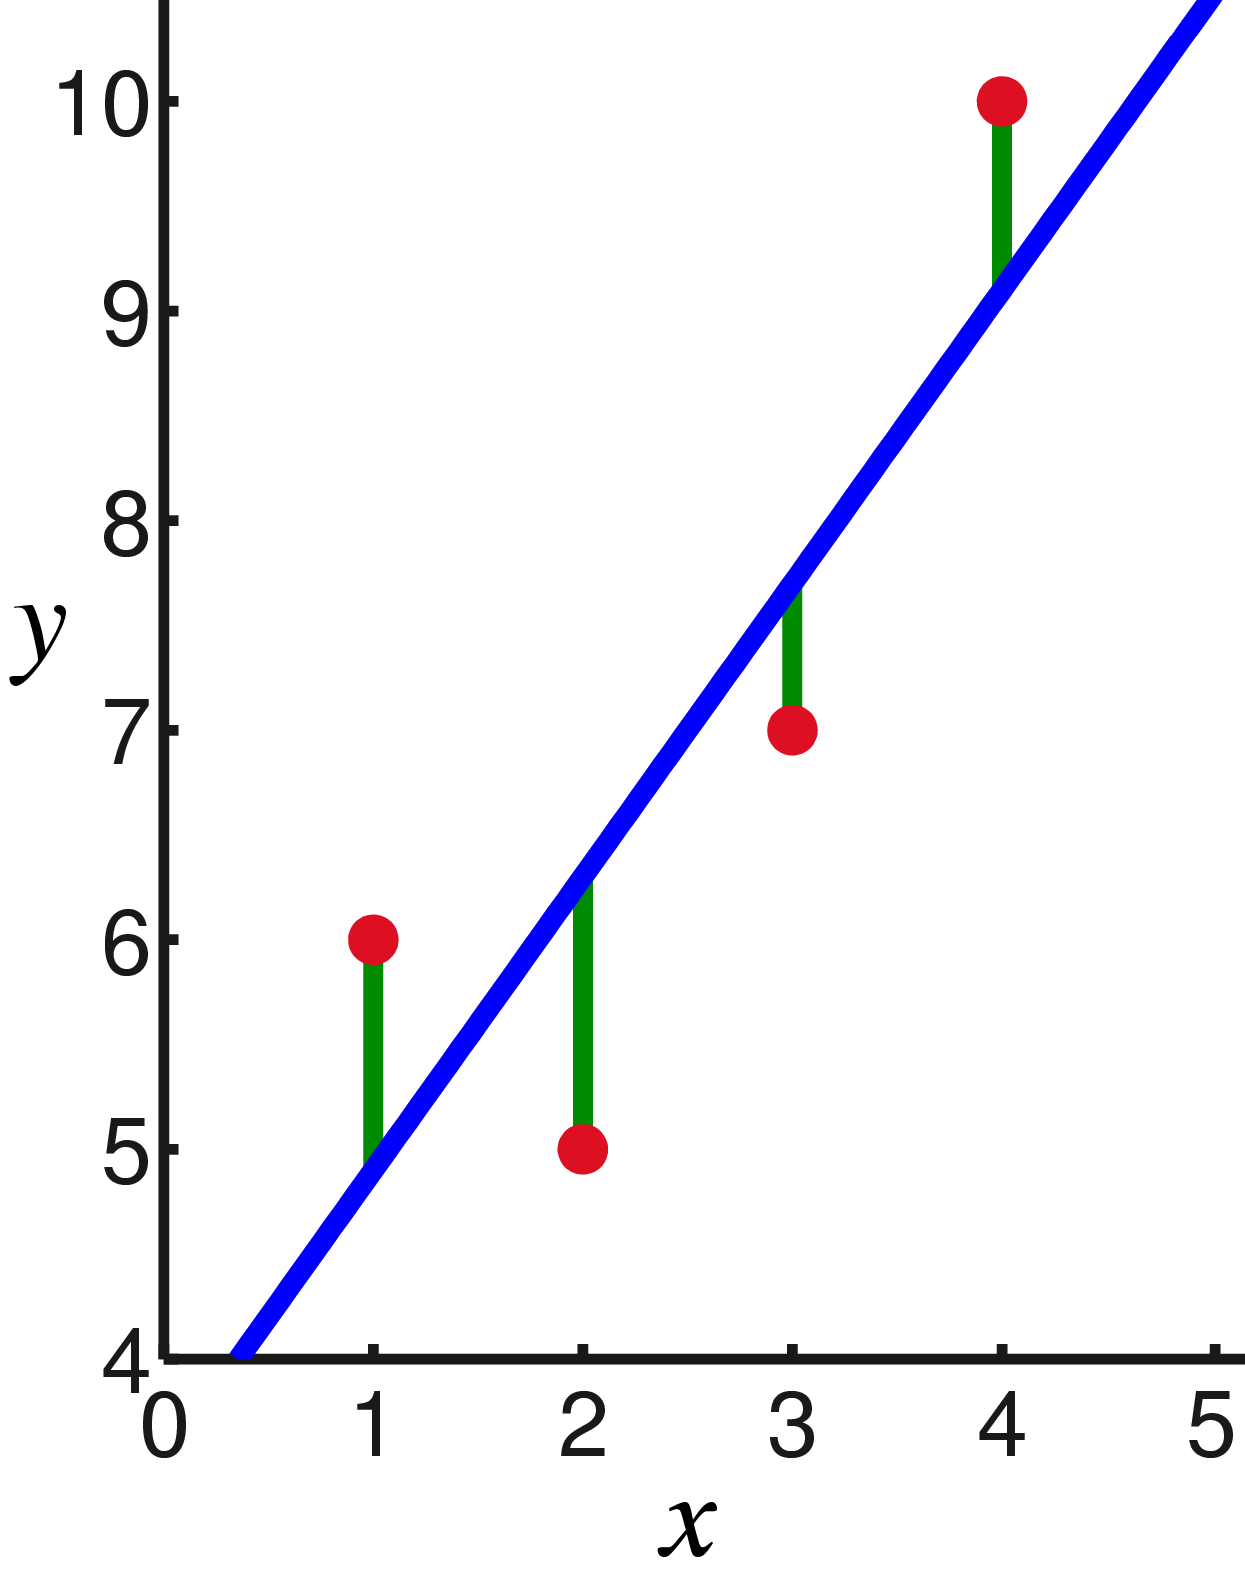 An illustration of linear regression, depicting some data, with the regression line and the distances from the data to the estimates which are to be minimized.